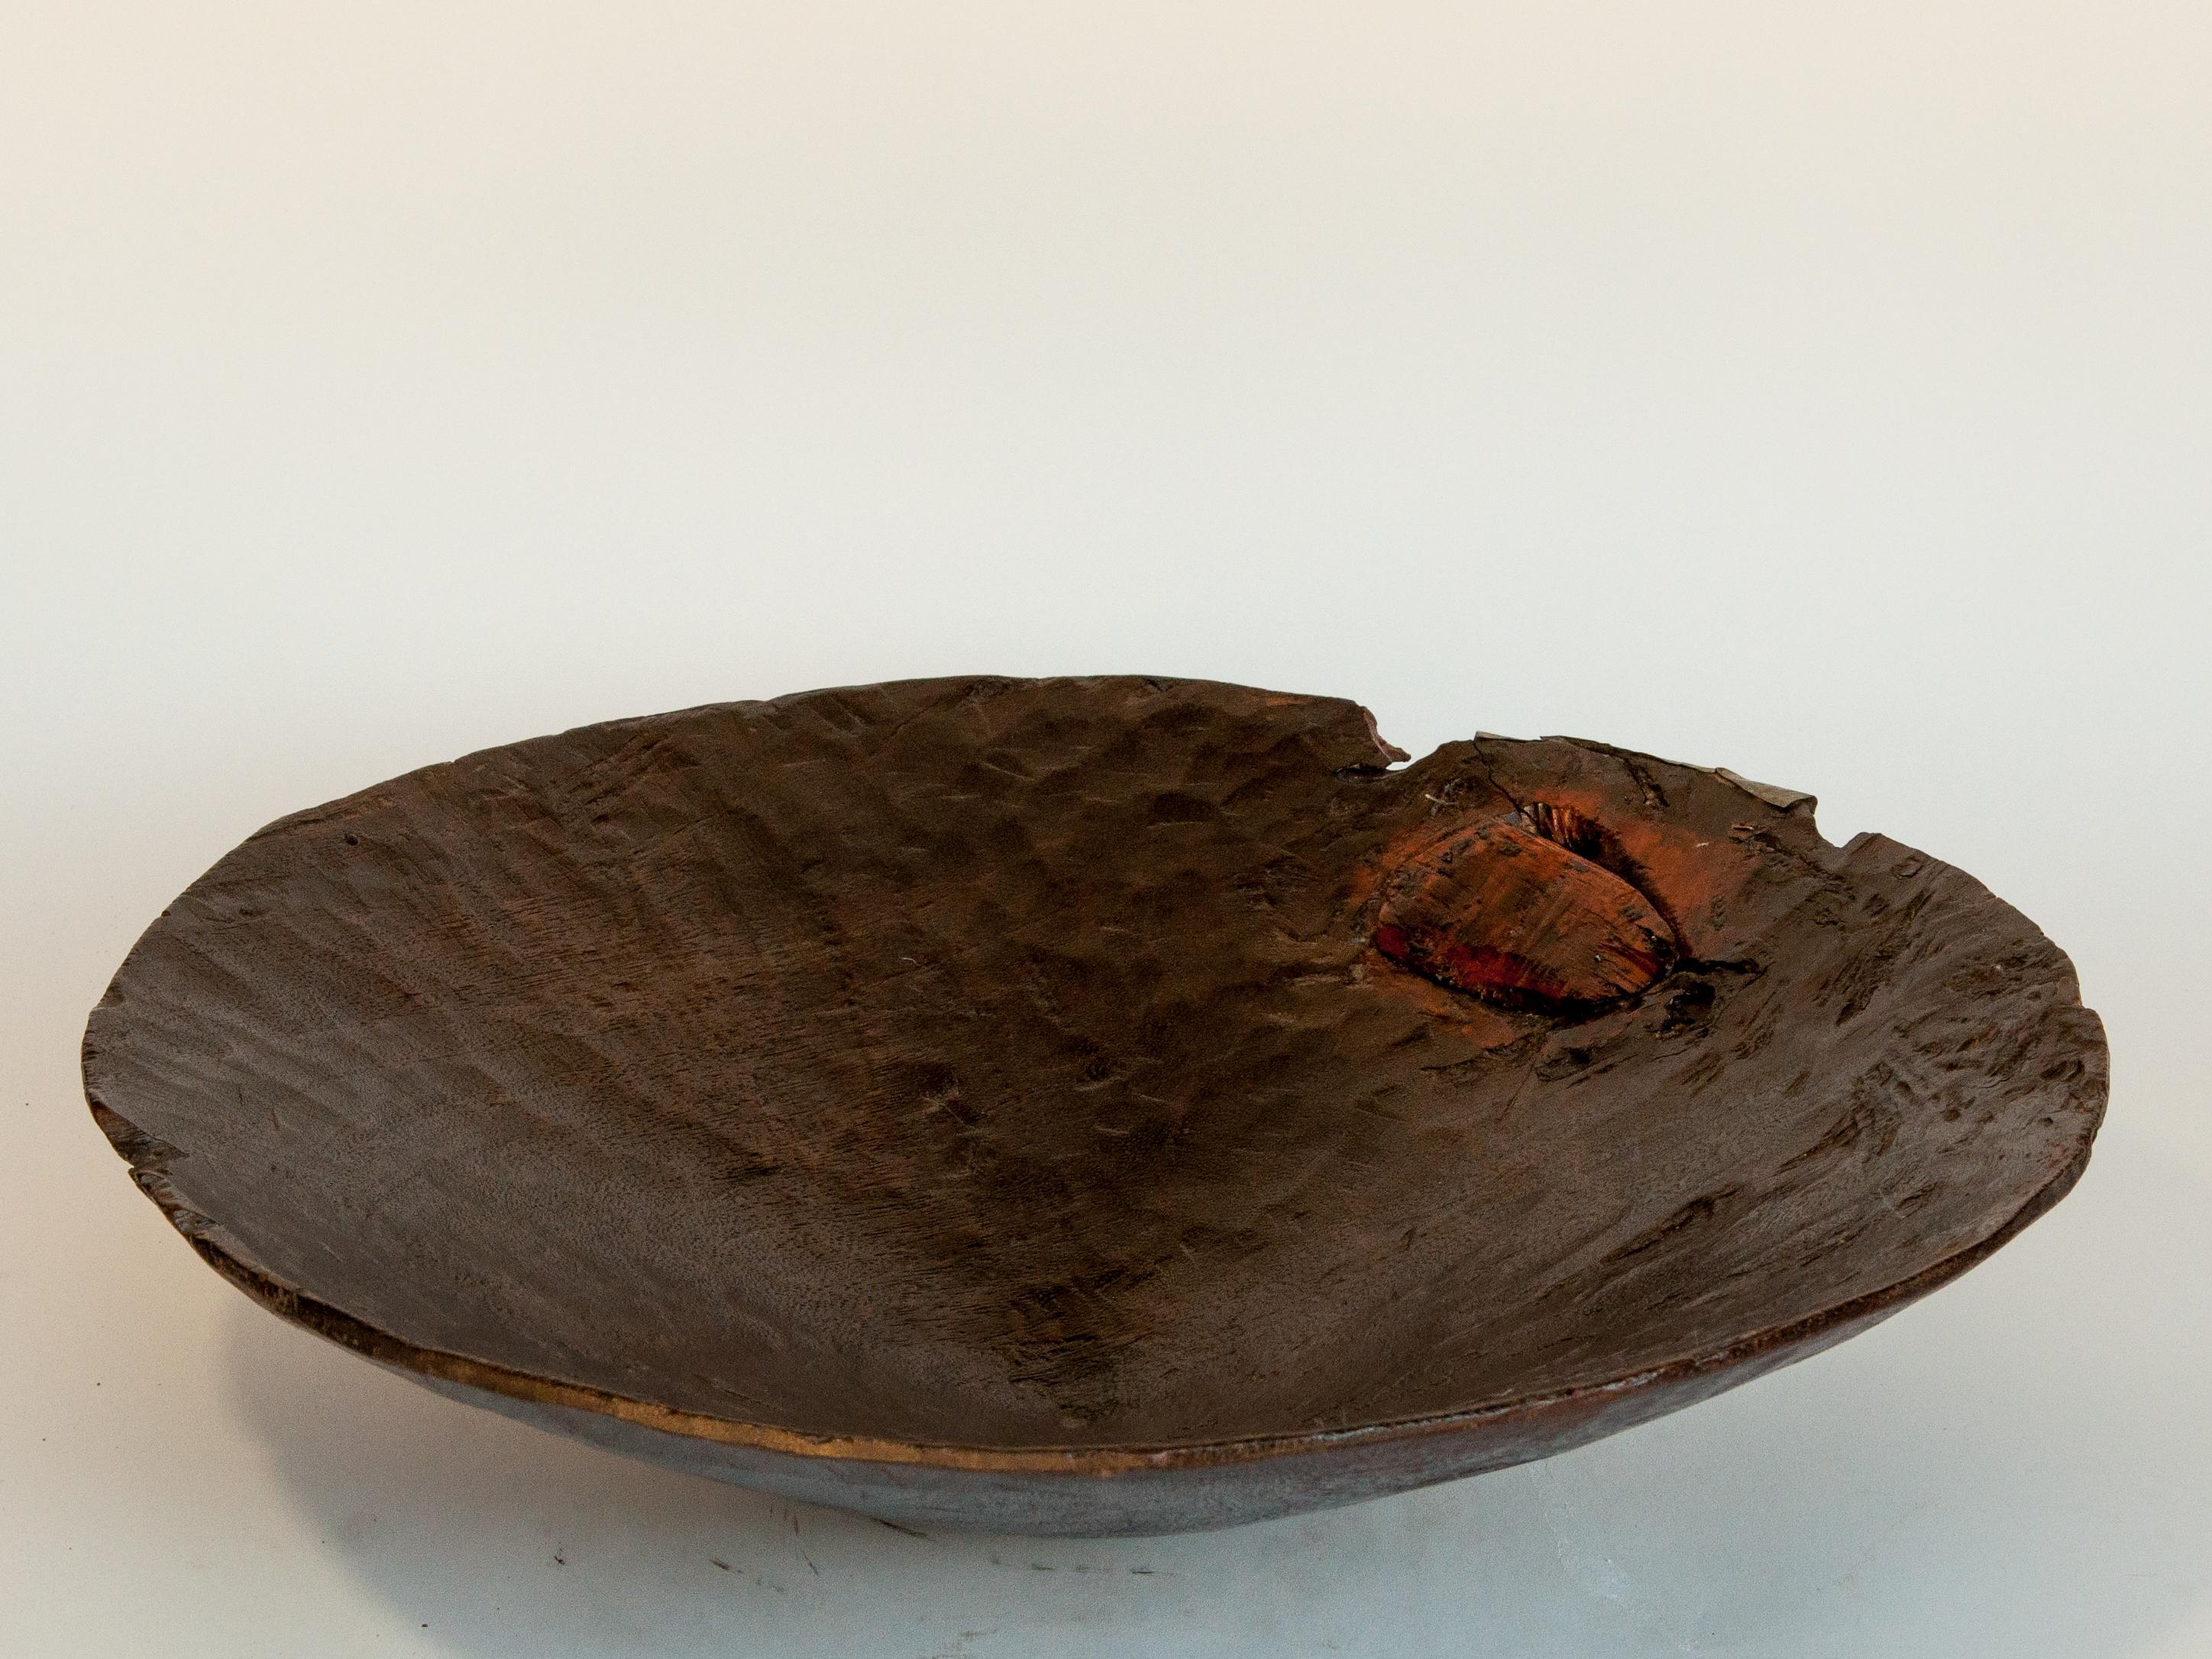 Hand-Crafted Vintage Gold Panning Tray / Bowl from Northeast Thailand, Mid-Late 20th Century